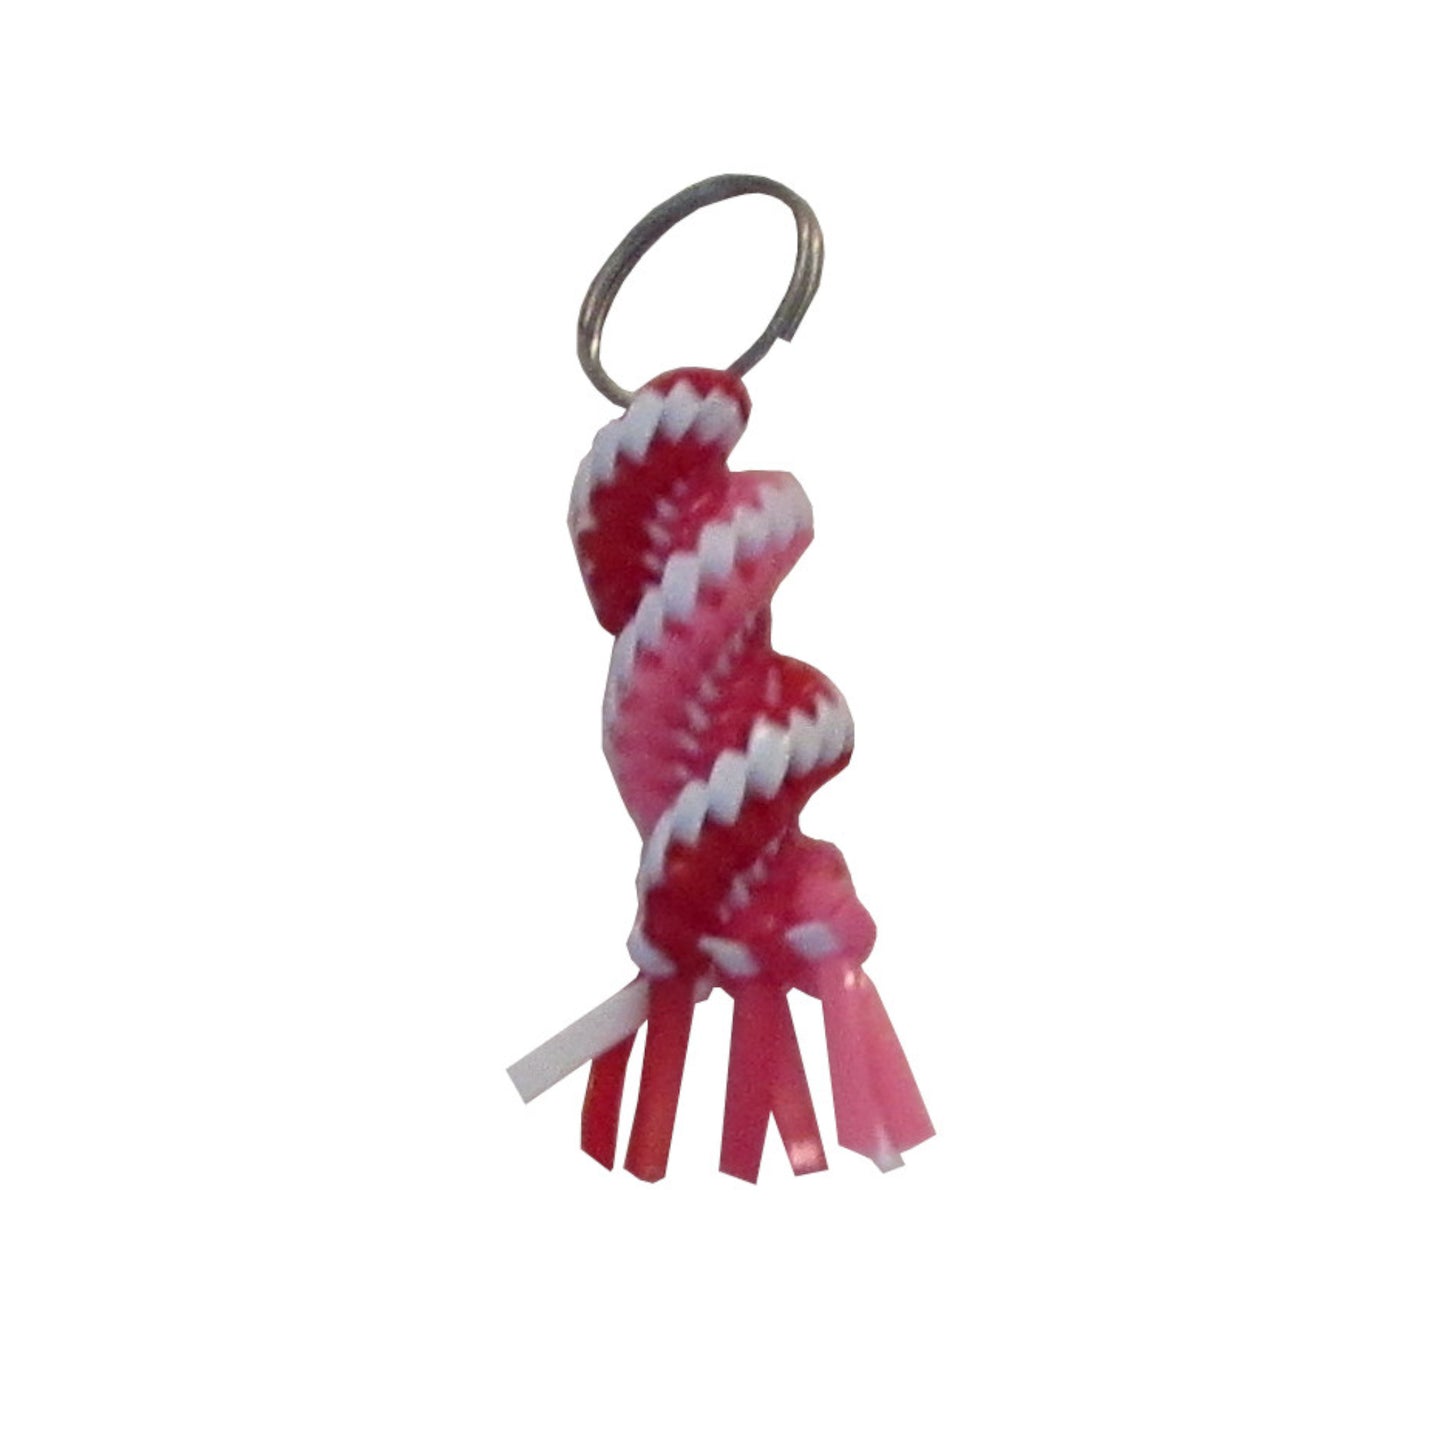 Pink, Red, and White Plastic Lacing Key Chain